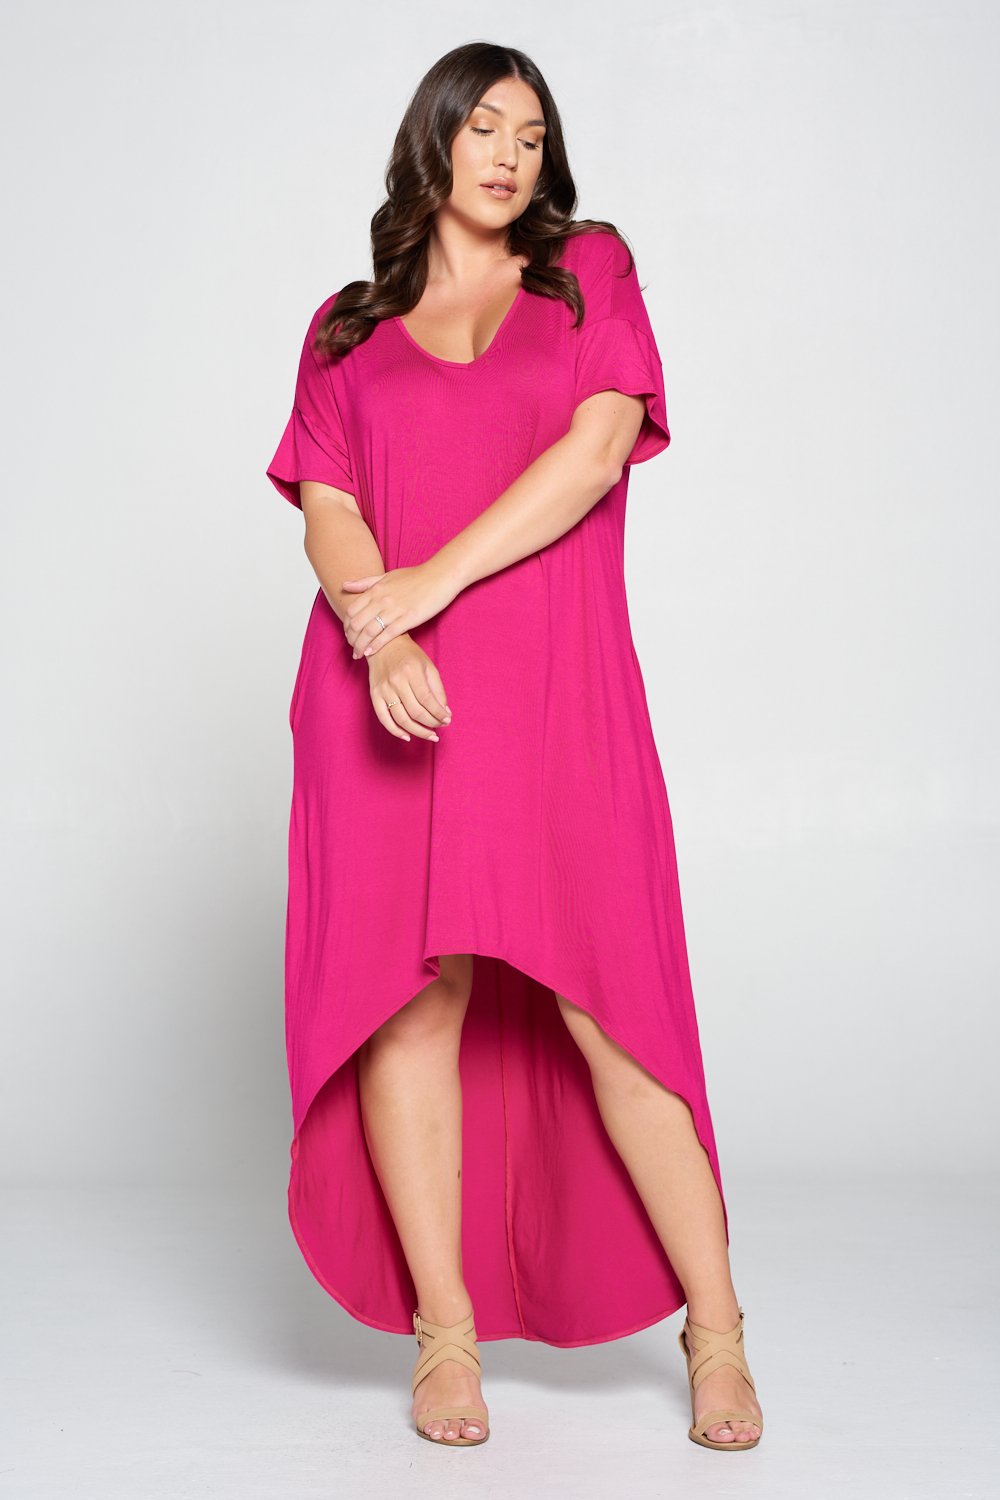 livd L I V D women's contemporary plus size clothing high low hi lo dress with pockets v neck sleeves in fuchsia mix of pink purple